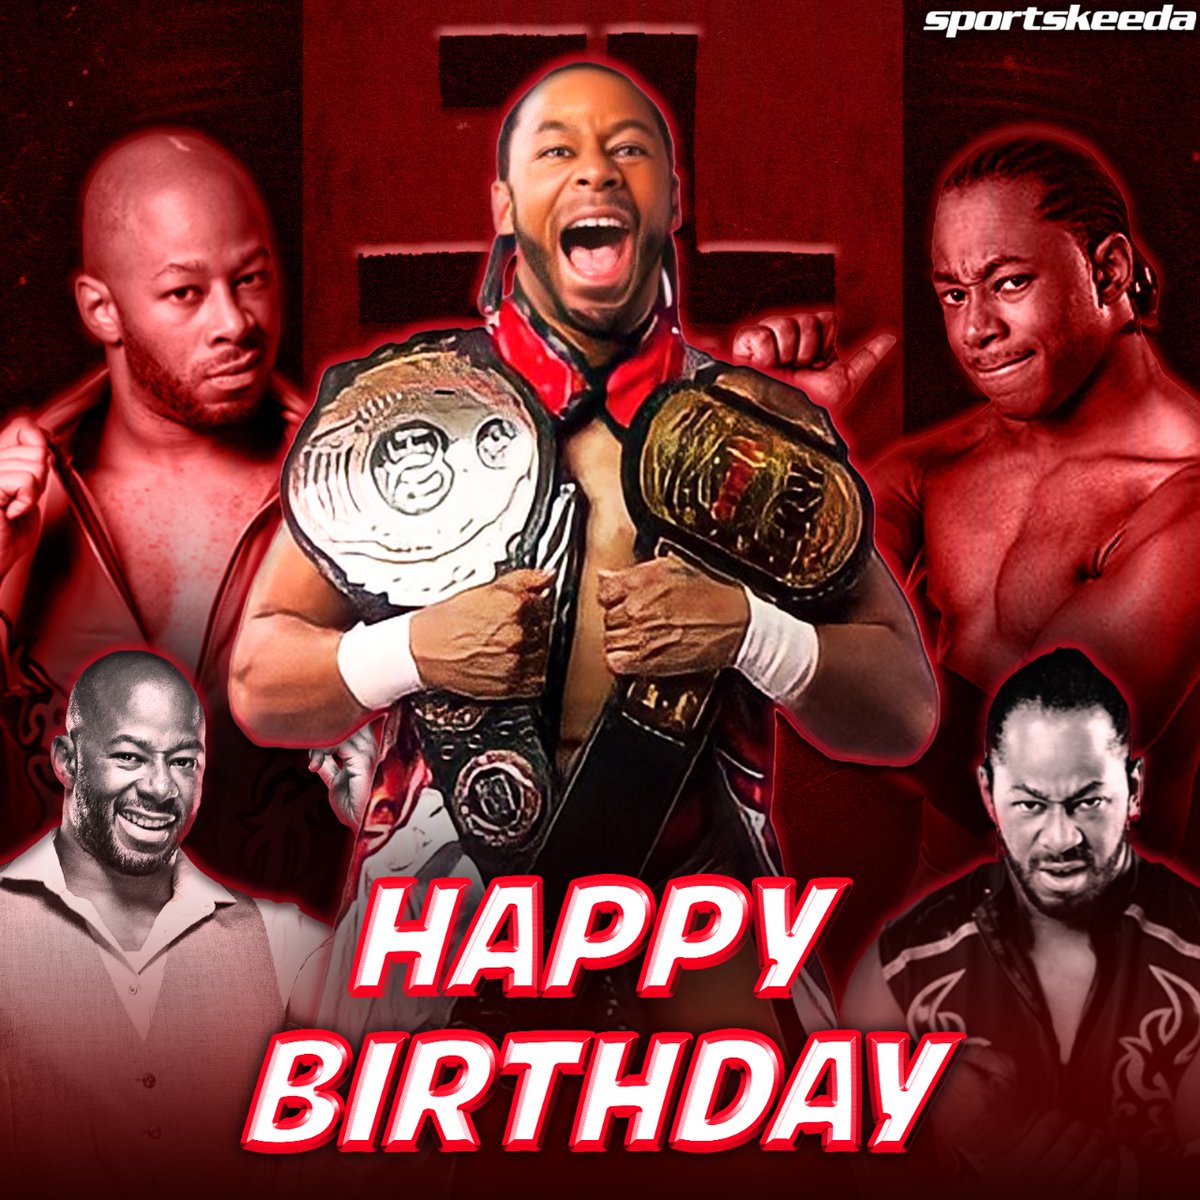 Sportskeeda wishes a very Happy Birthday to #JayLethal as The Franchise of Ring of Honor turns 39!  Whether you want an in-ring classic, a Macho Man impression, or just fancy a Woo-off, he has the Lethal Combination of all it takes.